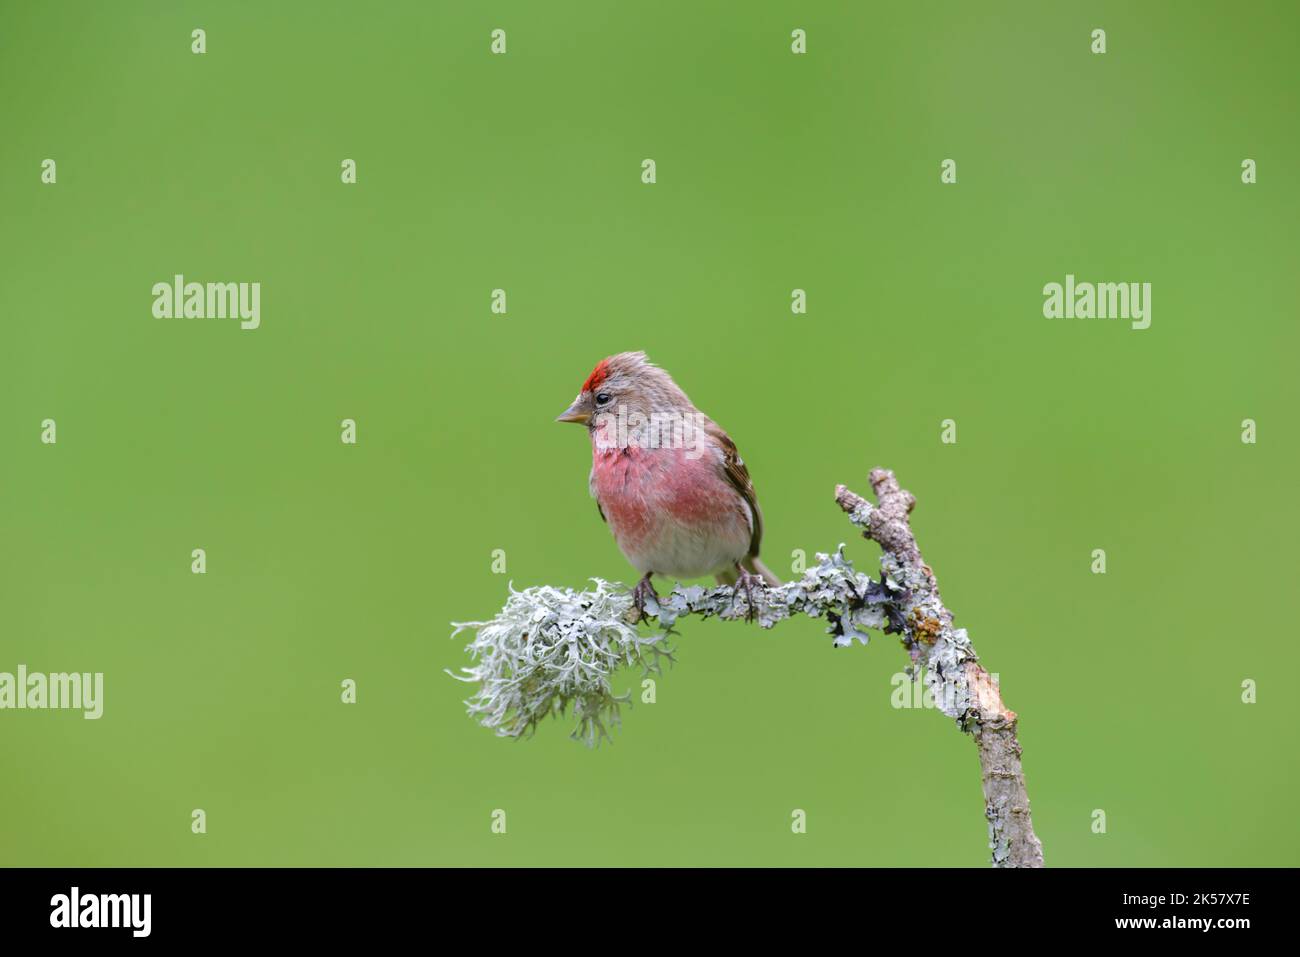 Redpoll, Acanthis Flammea, Male, perched on a lichen covered branch, against a clean green background Stock Photo